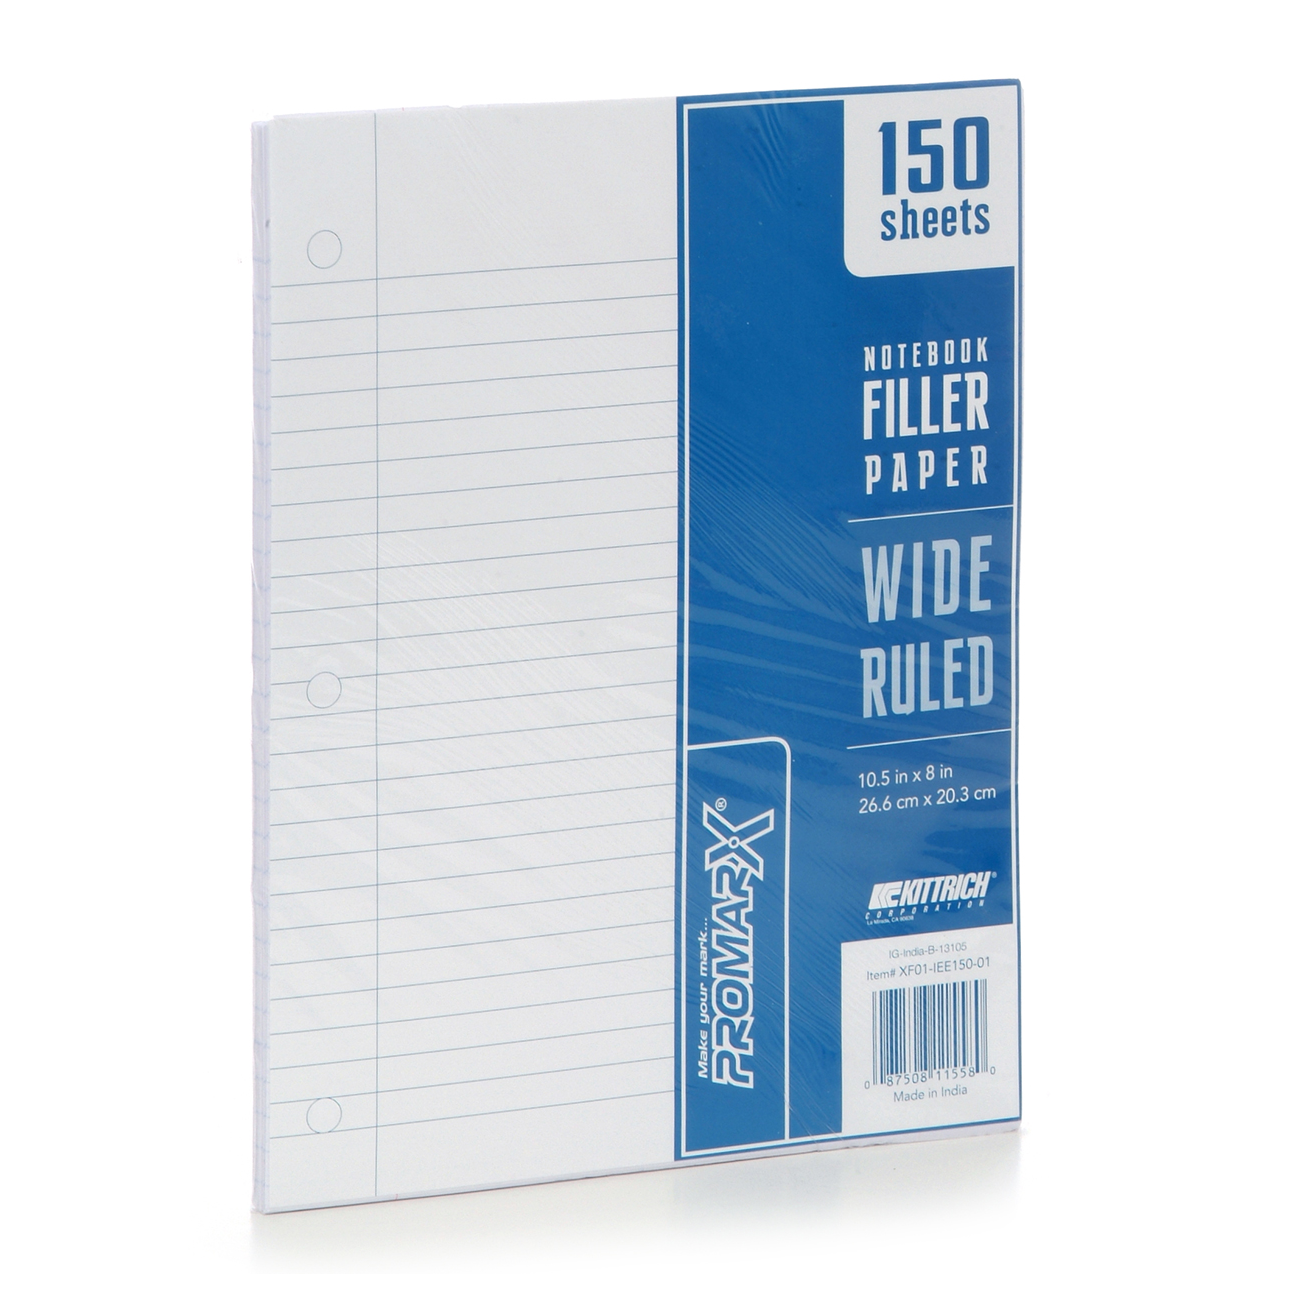 10.5” x 8” Loose Filler Paper 3-Hole Punched Wide Ruled